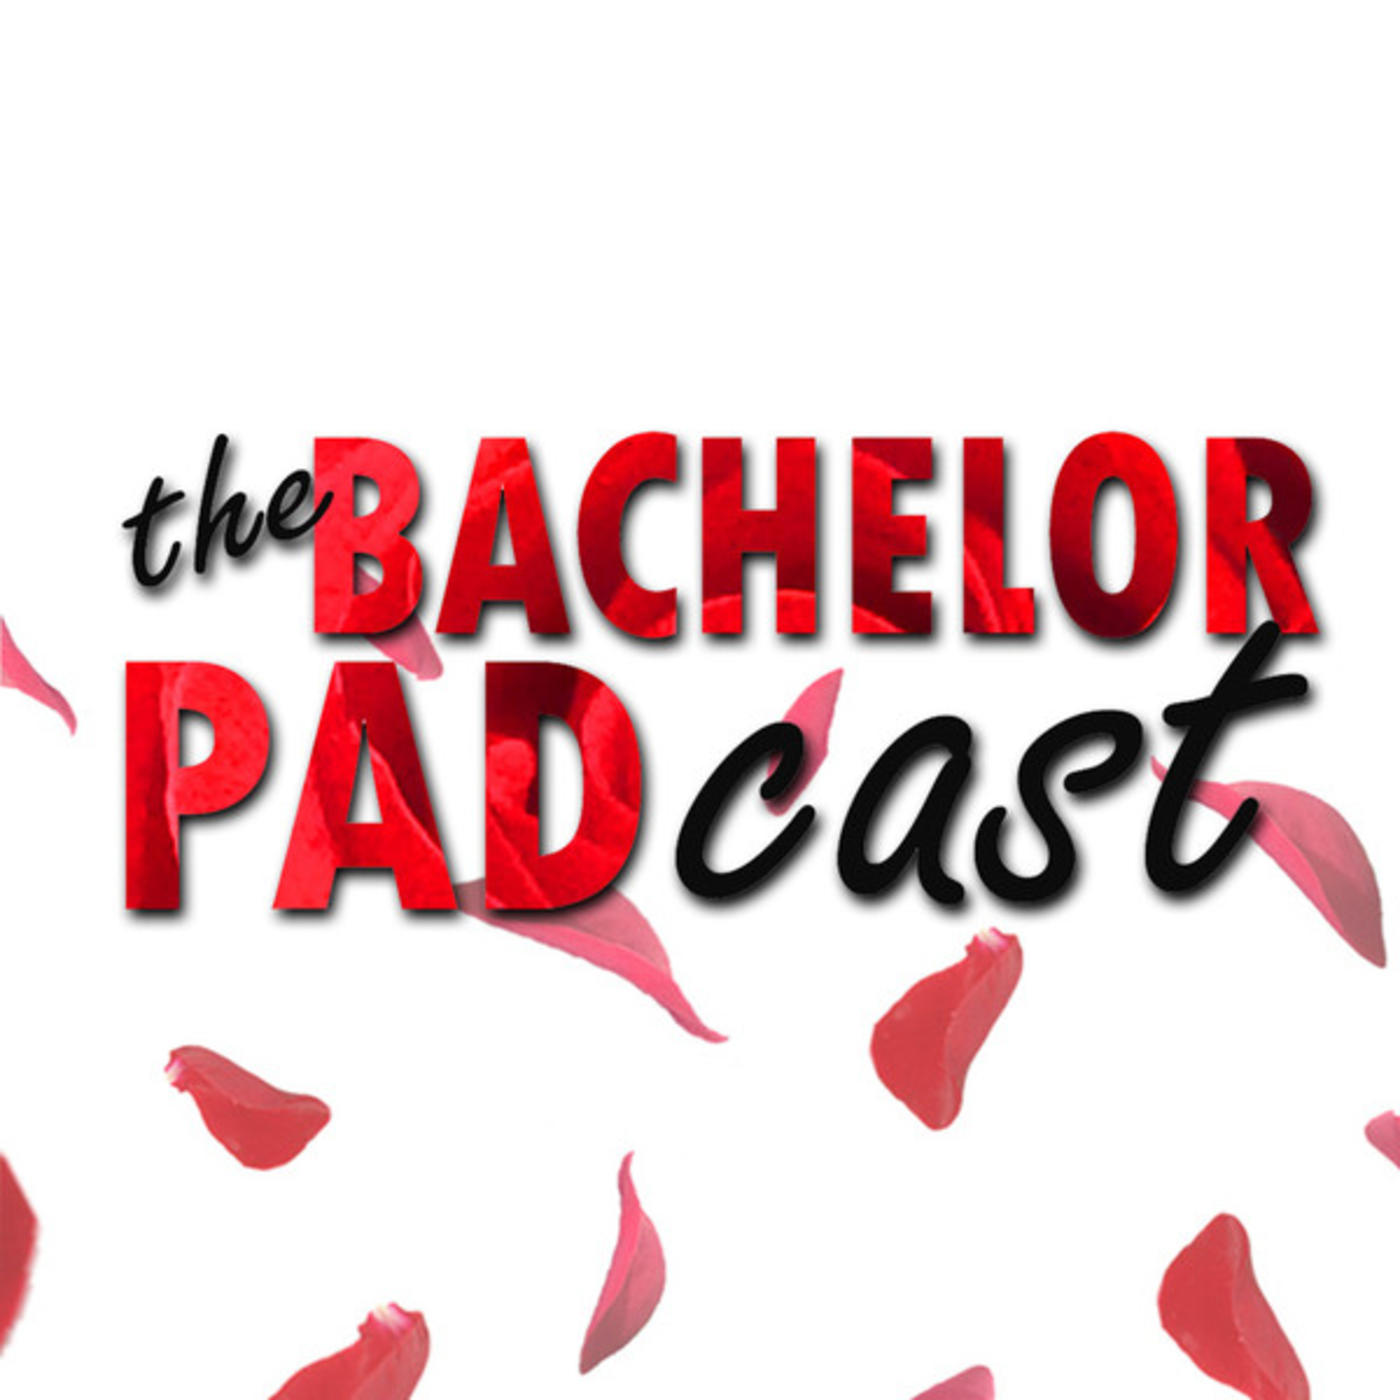 The Bachelor - Clear Frontrunner Heading to Hometowns